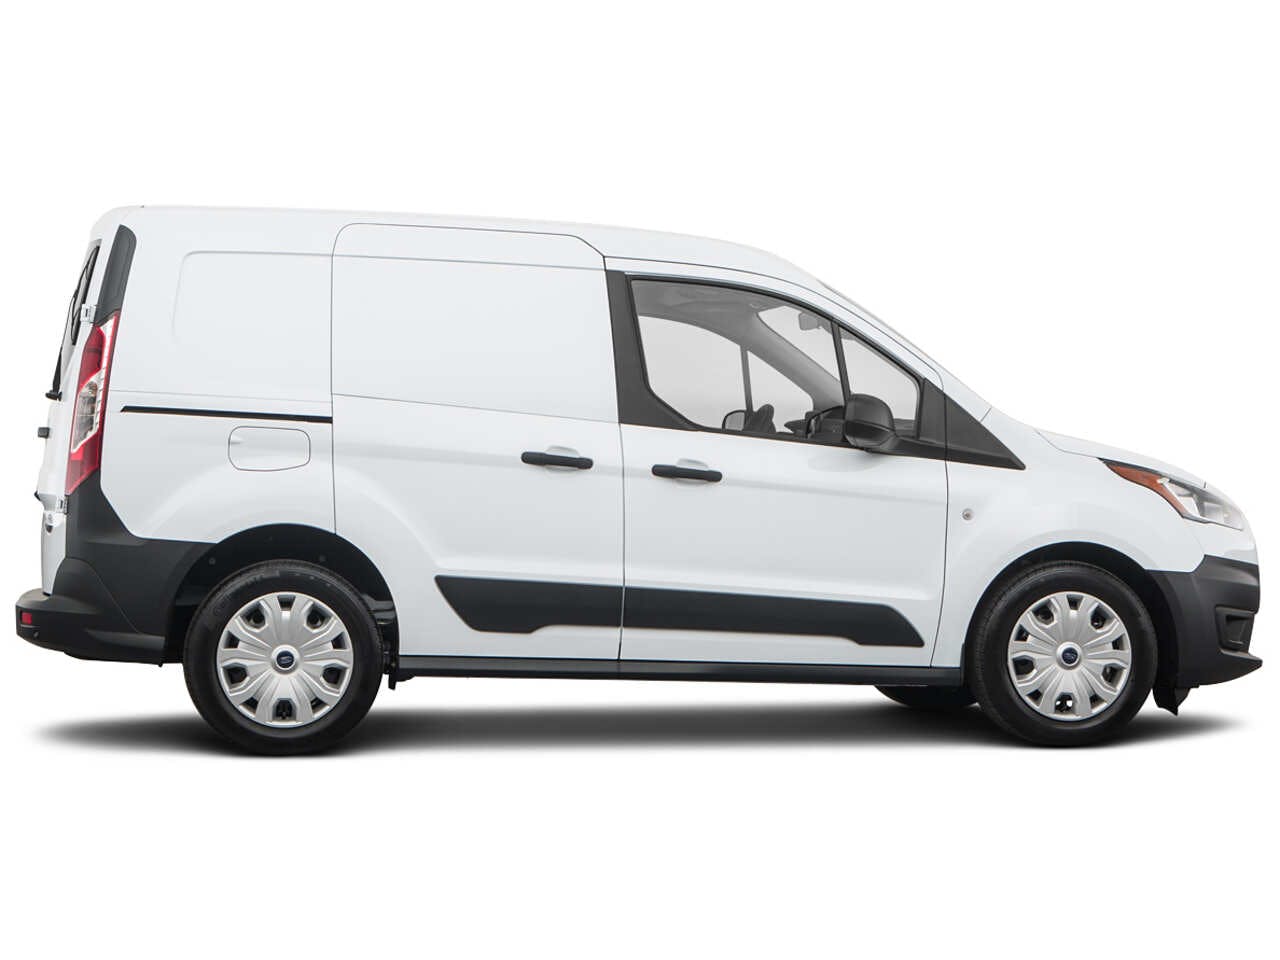 2022 Ford Transit Connect Van Review | Pricing, Trims & Photos - TrueCar